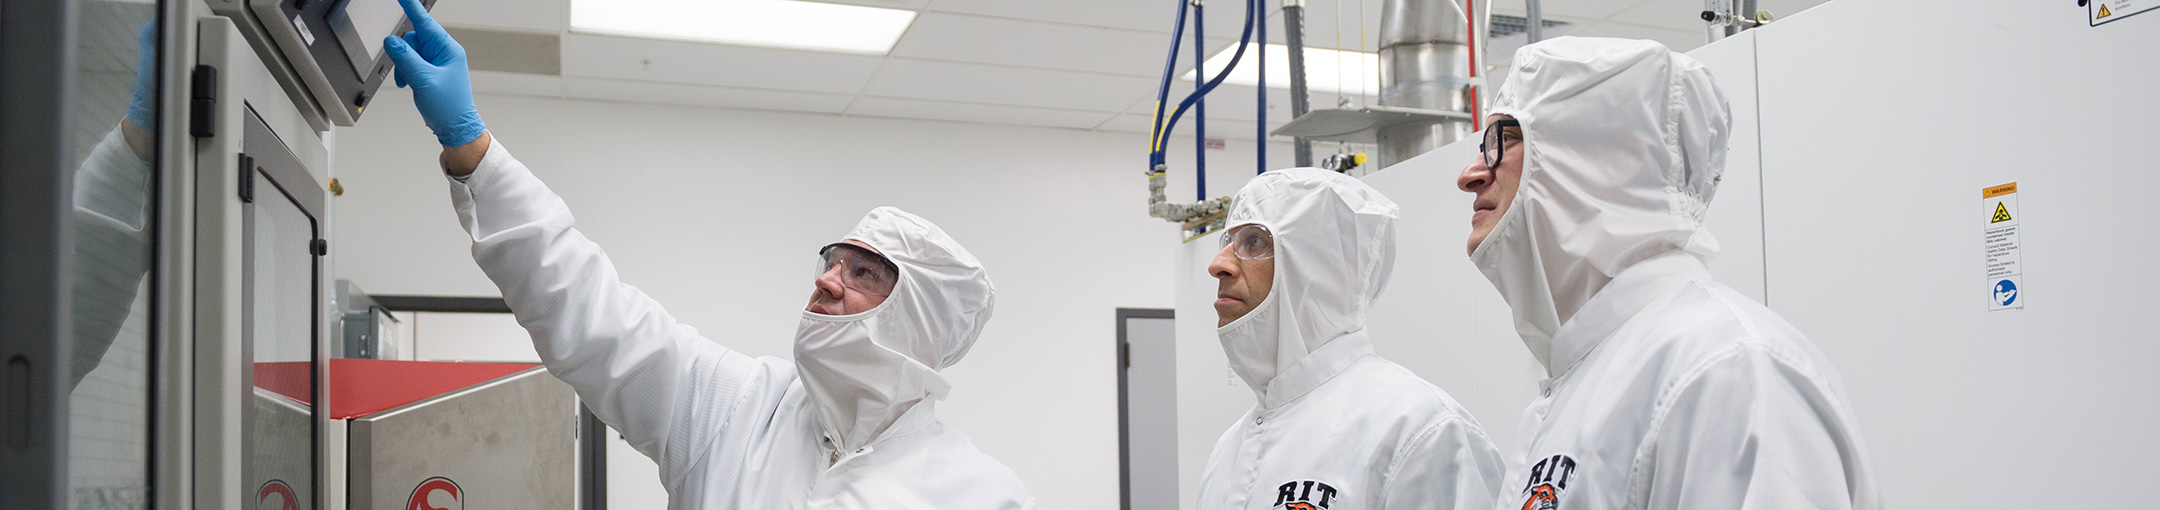 3 people in a clean room wearing white protective suits.